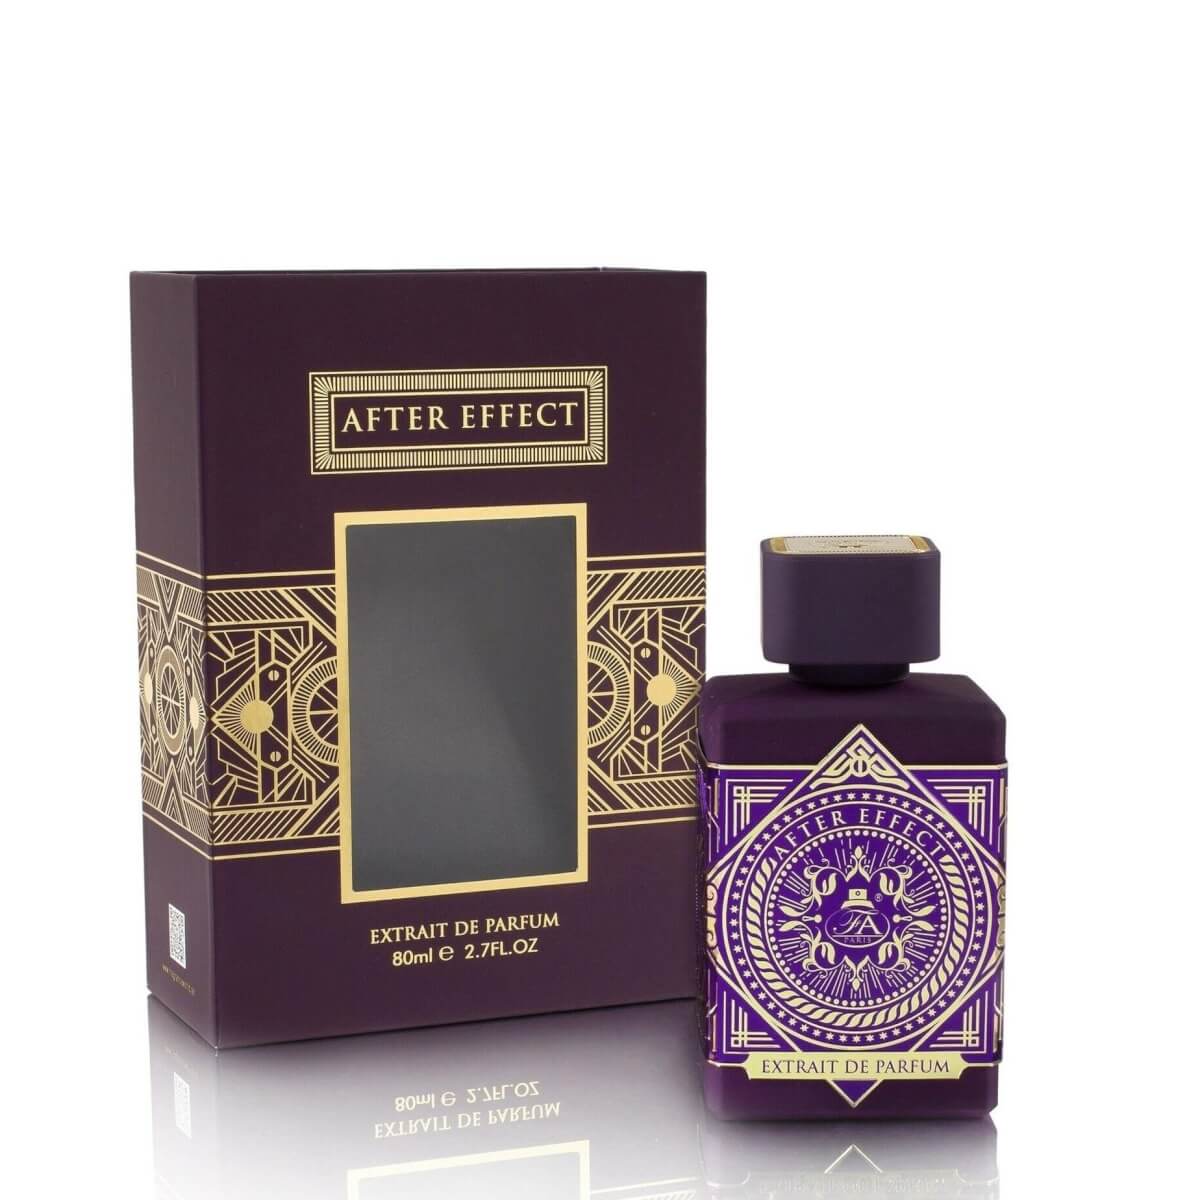 After Effect Perfume / Eau De Parfum 100Ml By Fa Paris (Fragrance World) (Inspired By Initio Side Effect)